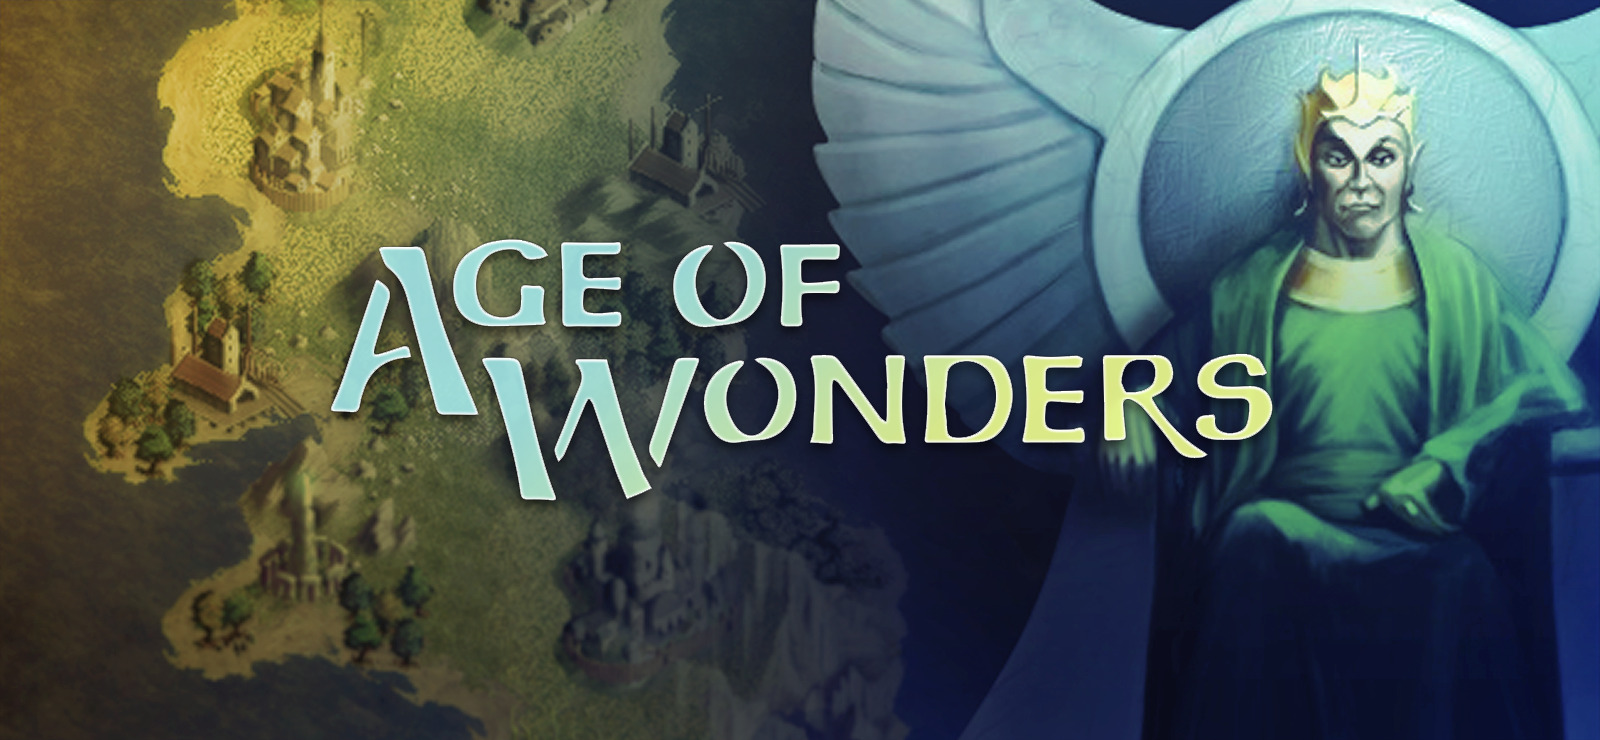 age of wonders 4 cultures